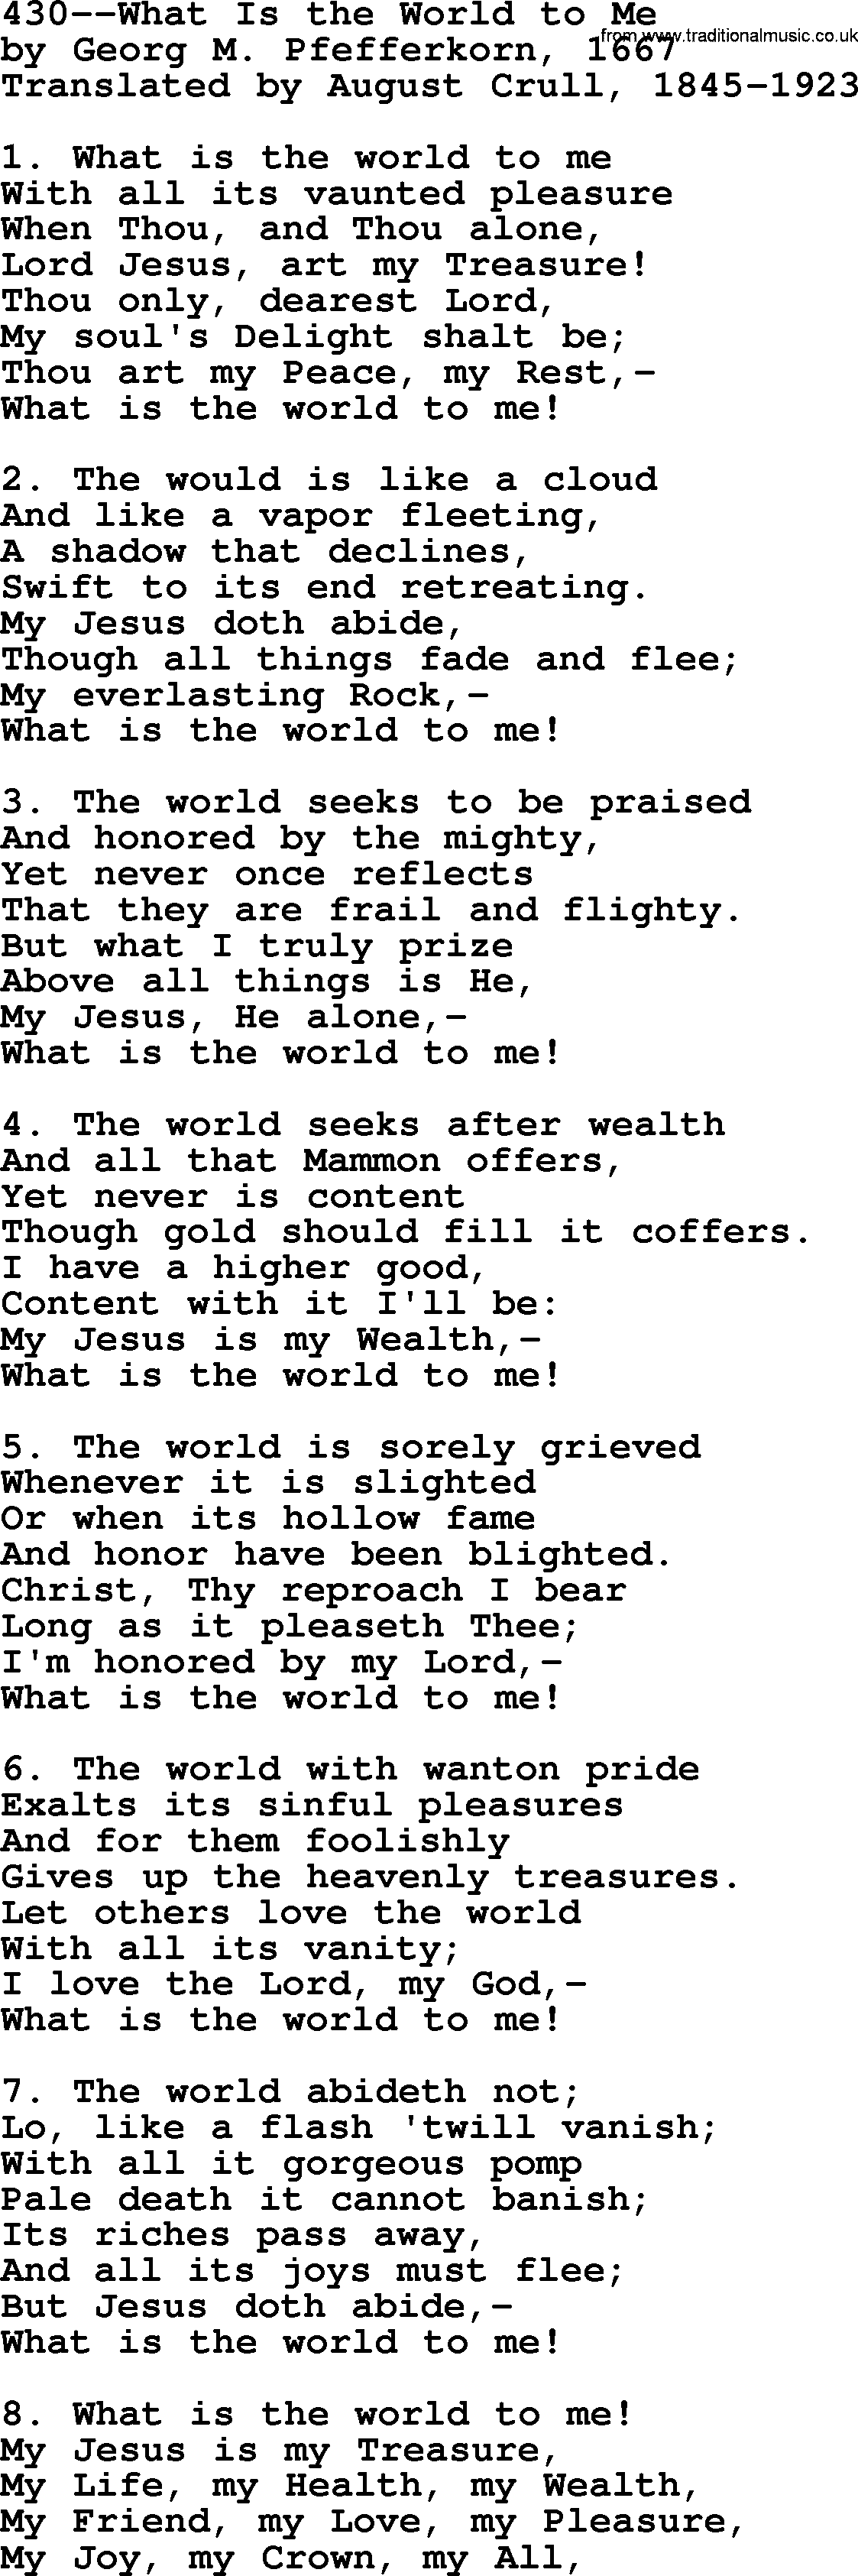 Lutheran Hymn: 430--What Is the World to Me.txt lyrics with PDF